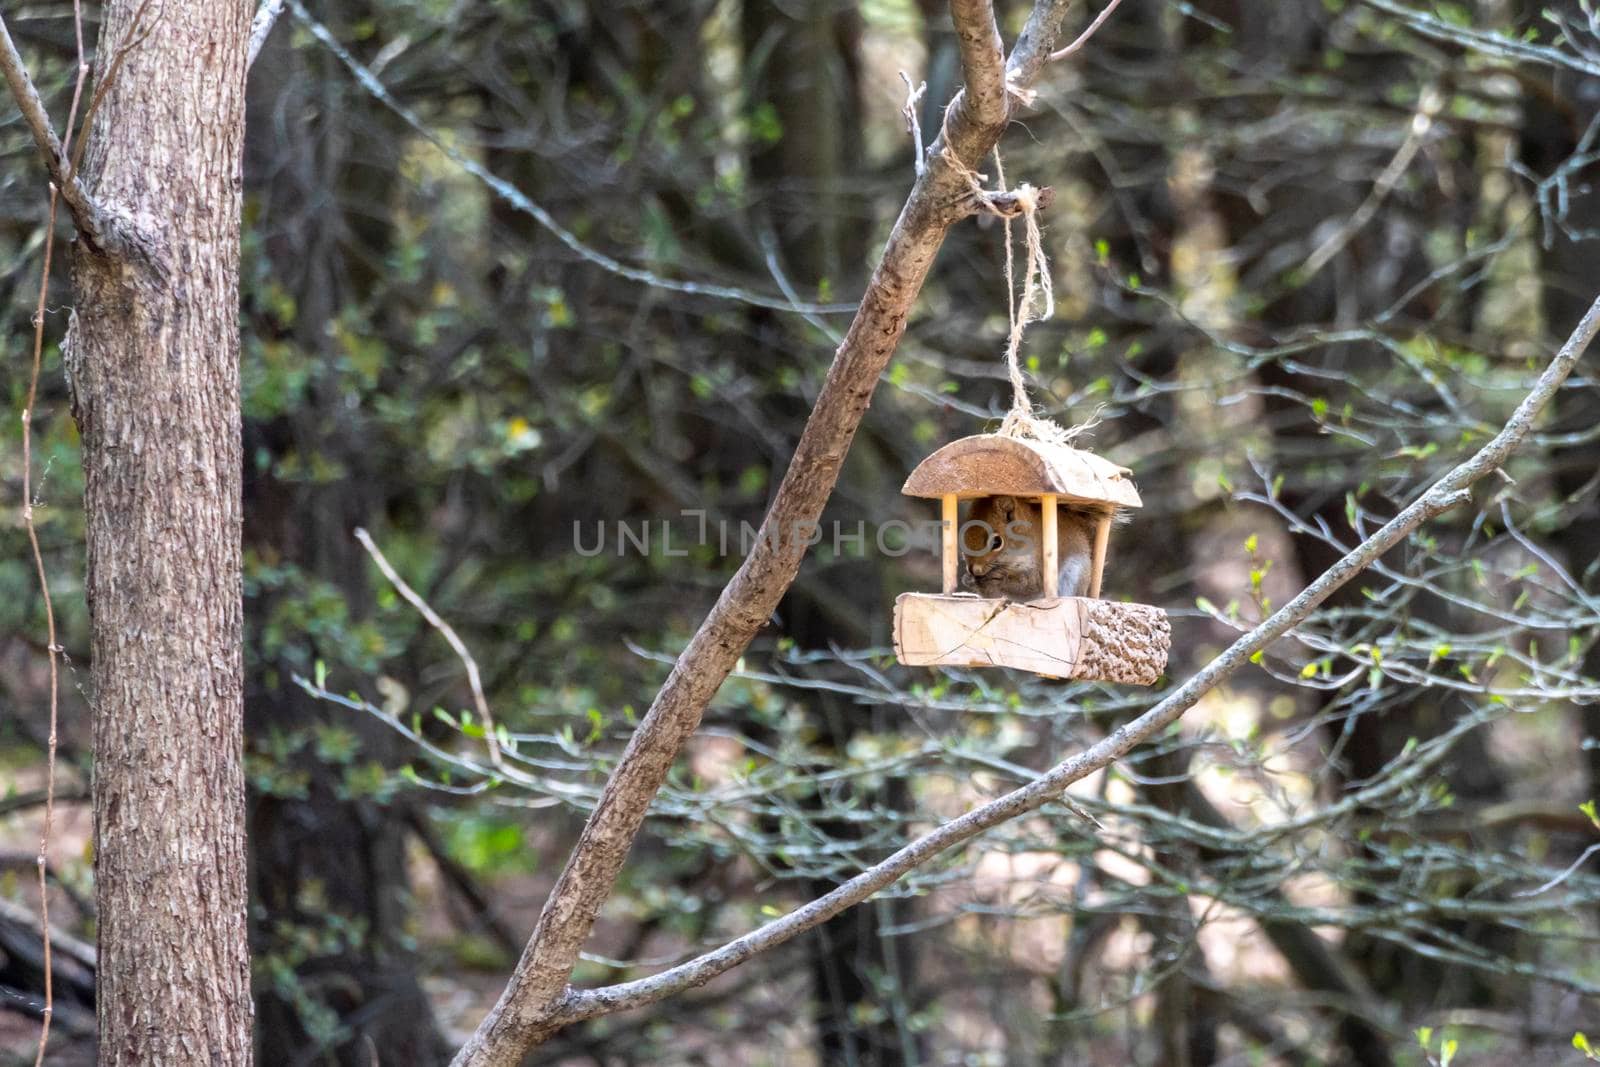 Squirrel, in the forest, eating from a bird feeder by ben44